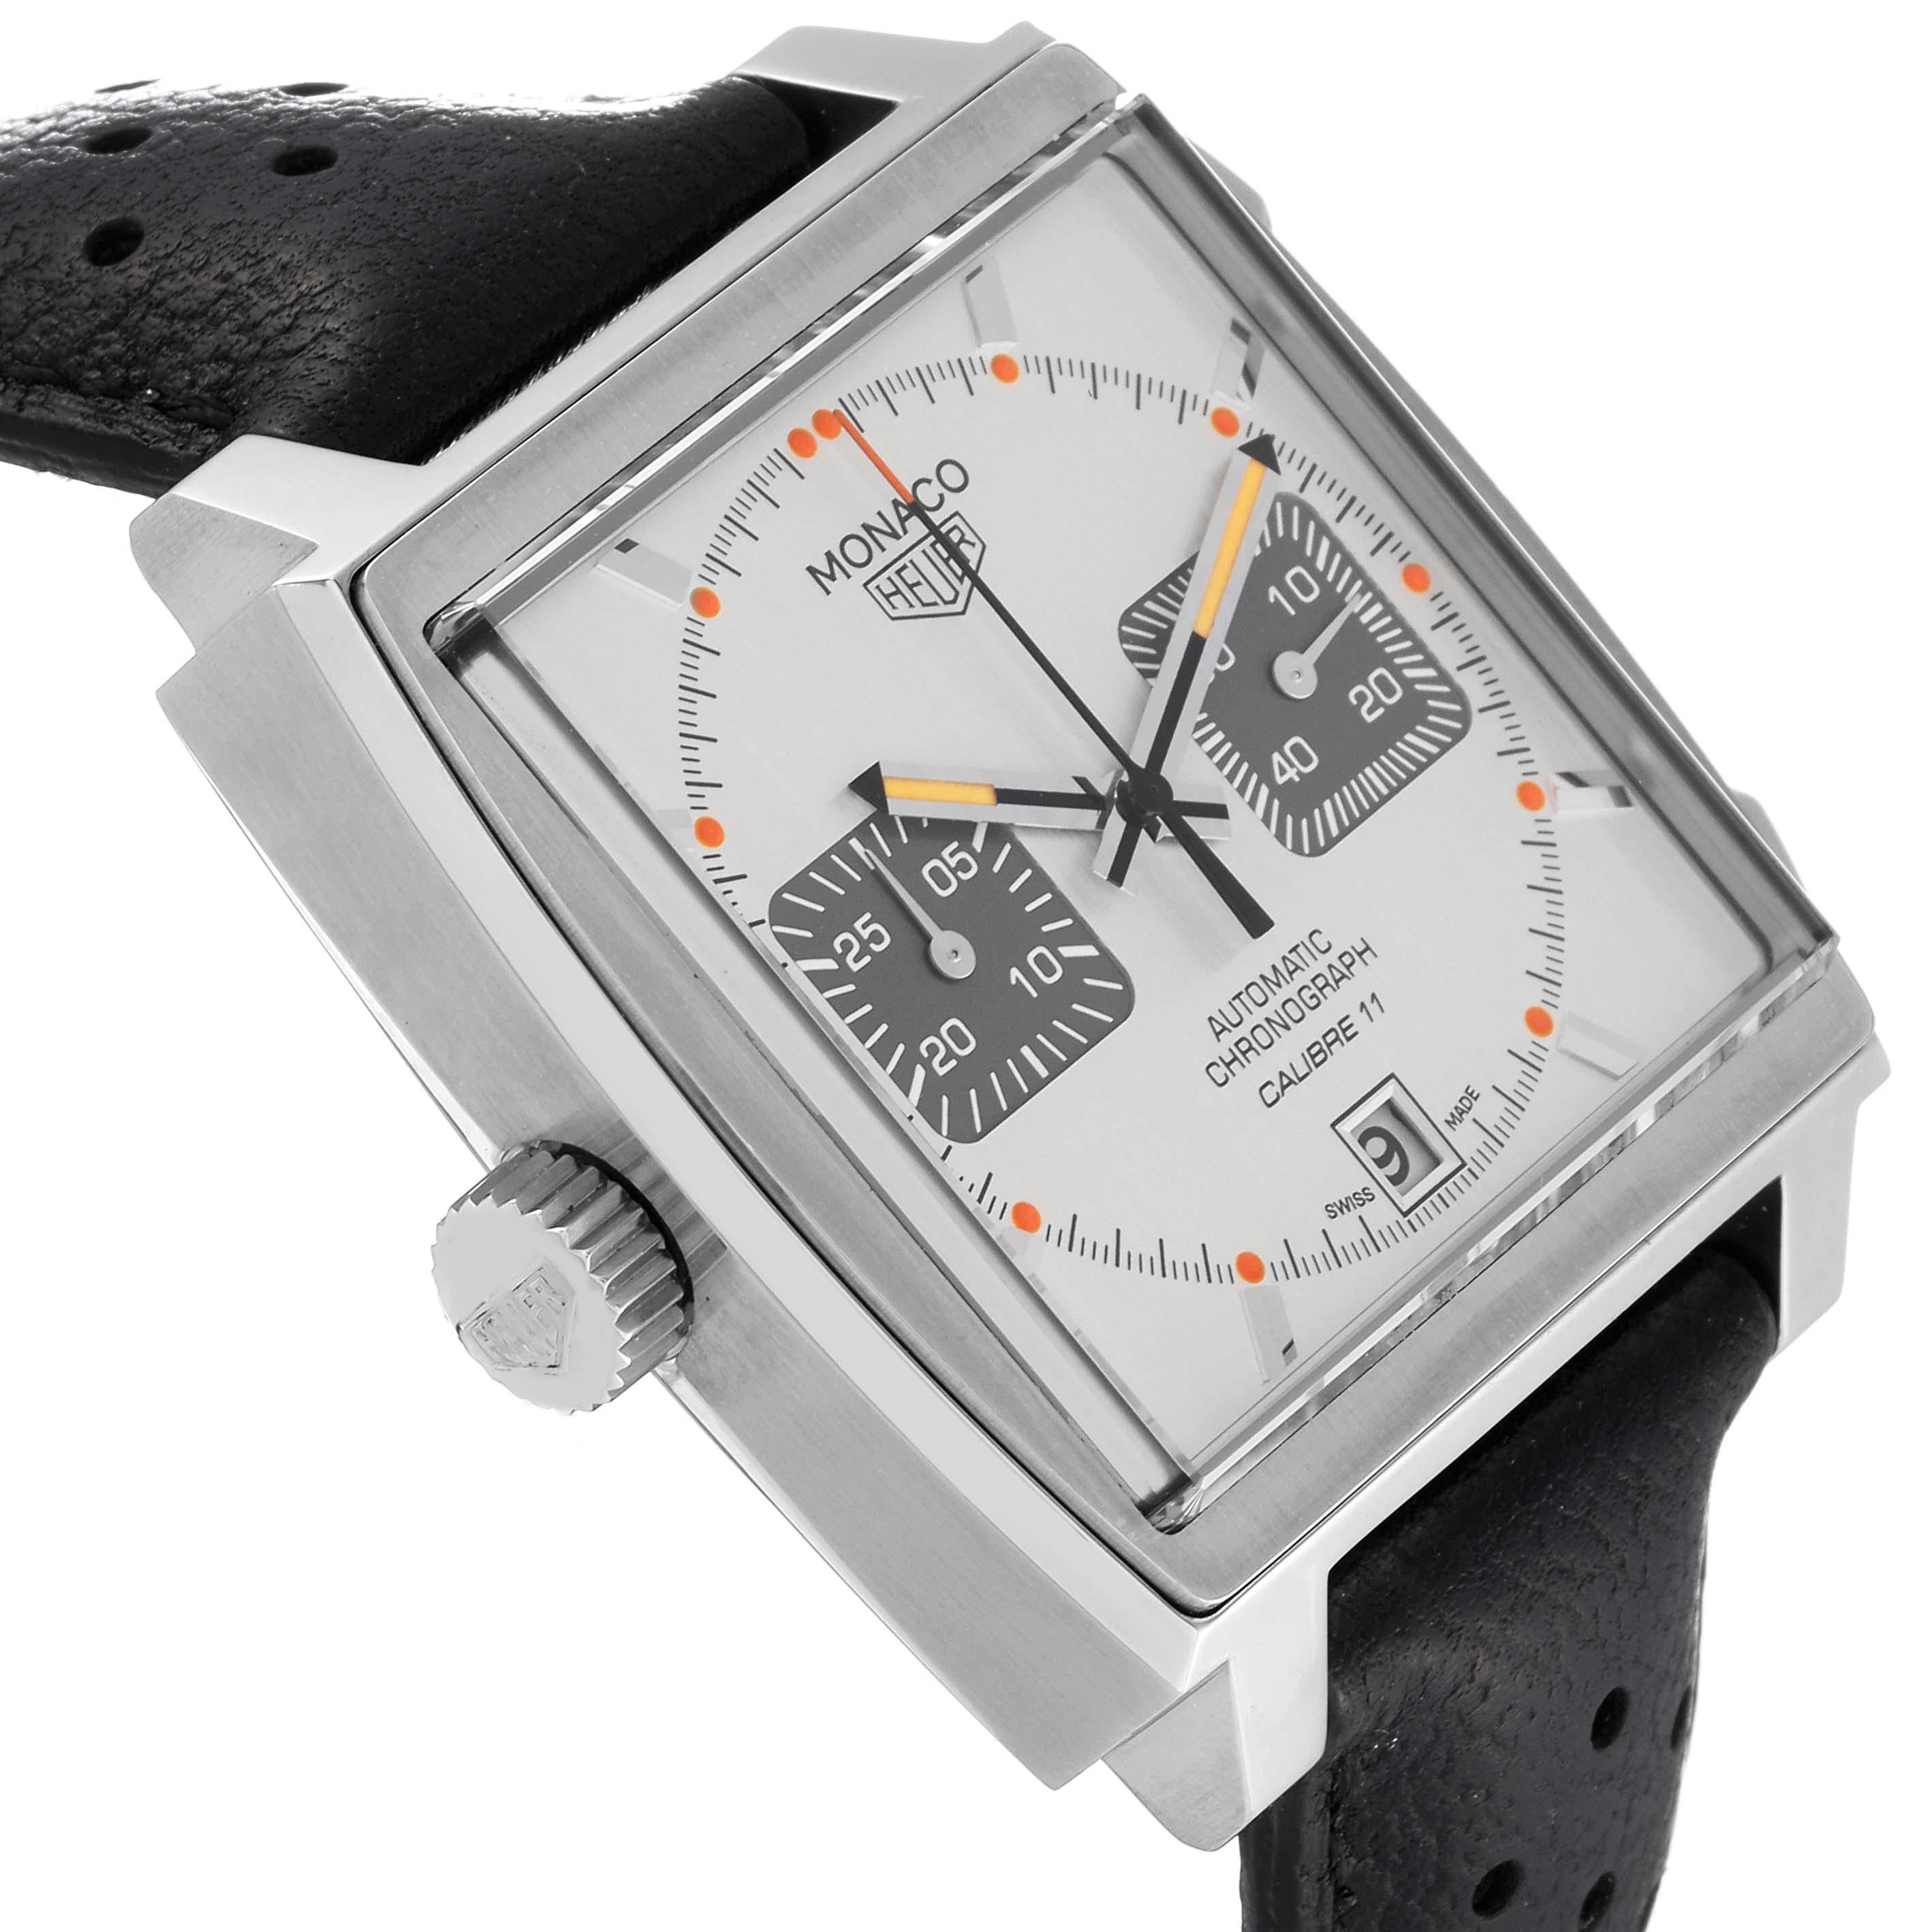 Tag Heuer Monaco Silver Dial Limited Edition Steel Mens Watch CAW211C Box Card. Automatic self-winding chronograph movement. Alternate fine-brushed and polished stainless steel case 39.0 x 39.0 mm. Fluted crown. Exhibition transparent sapphire